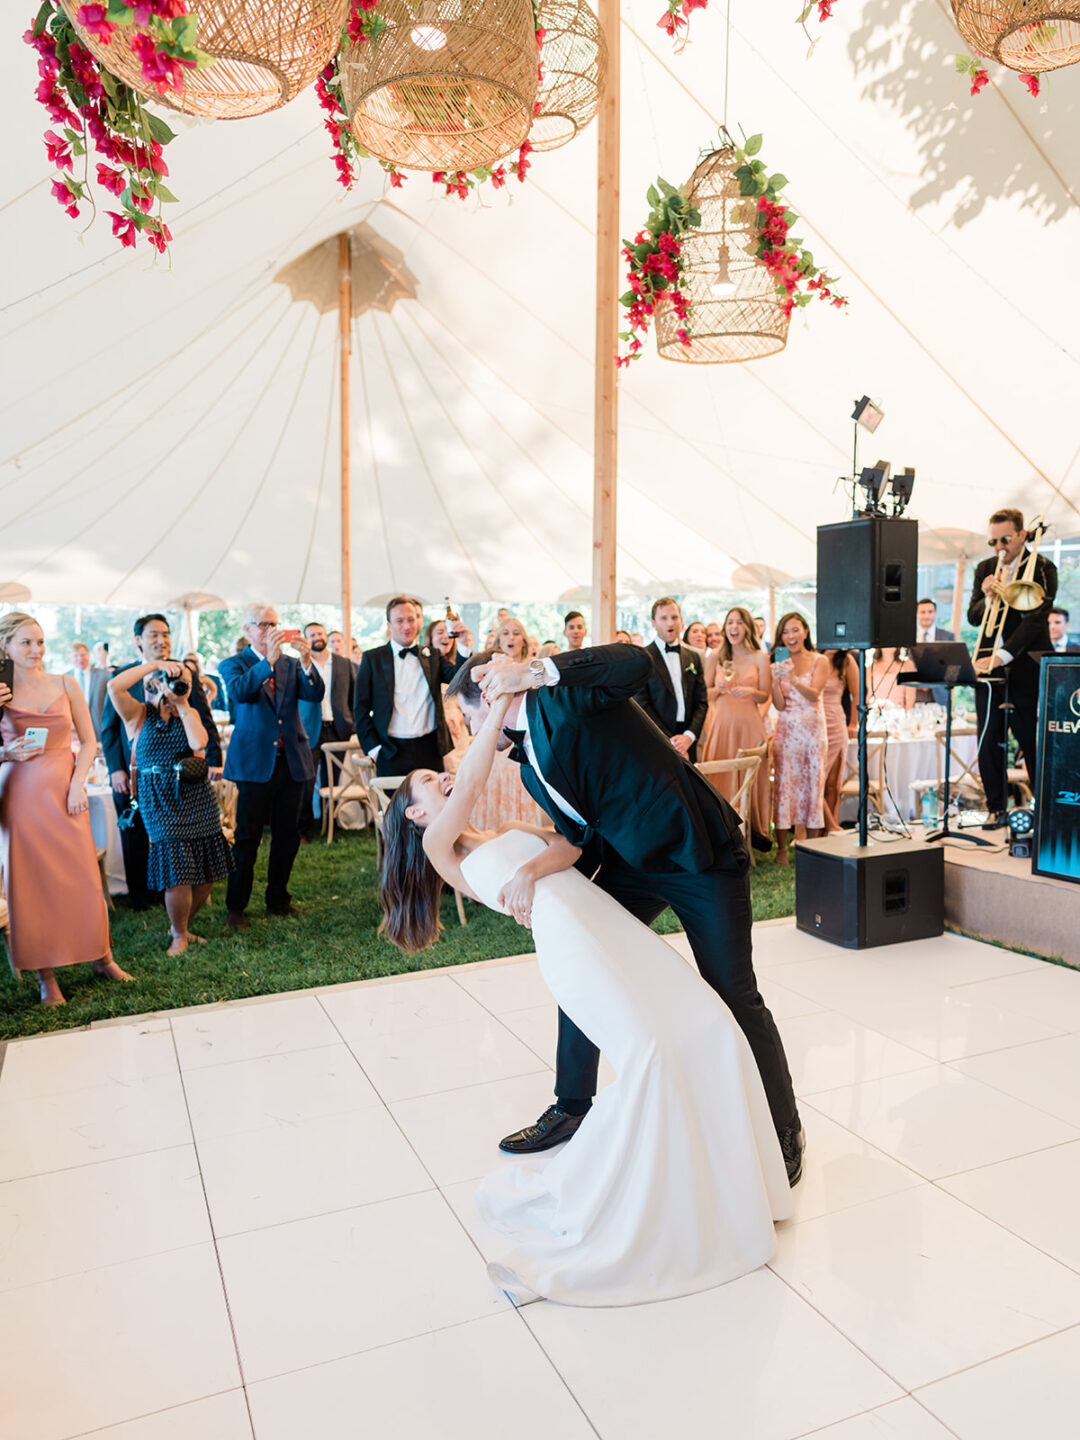 newlyweds dancing under sperry sailcloth tent on white dance floor with rattan chandeliers above 